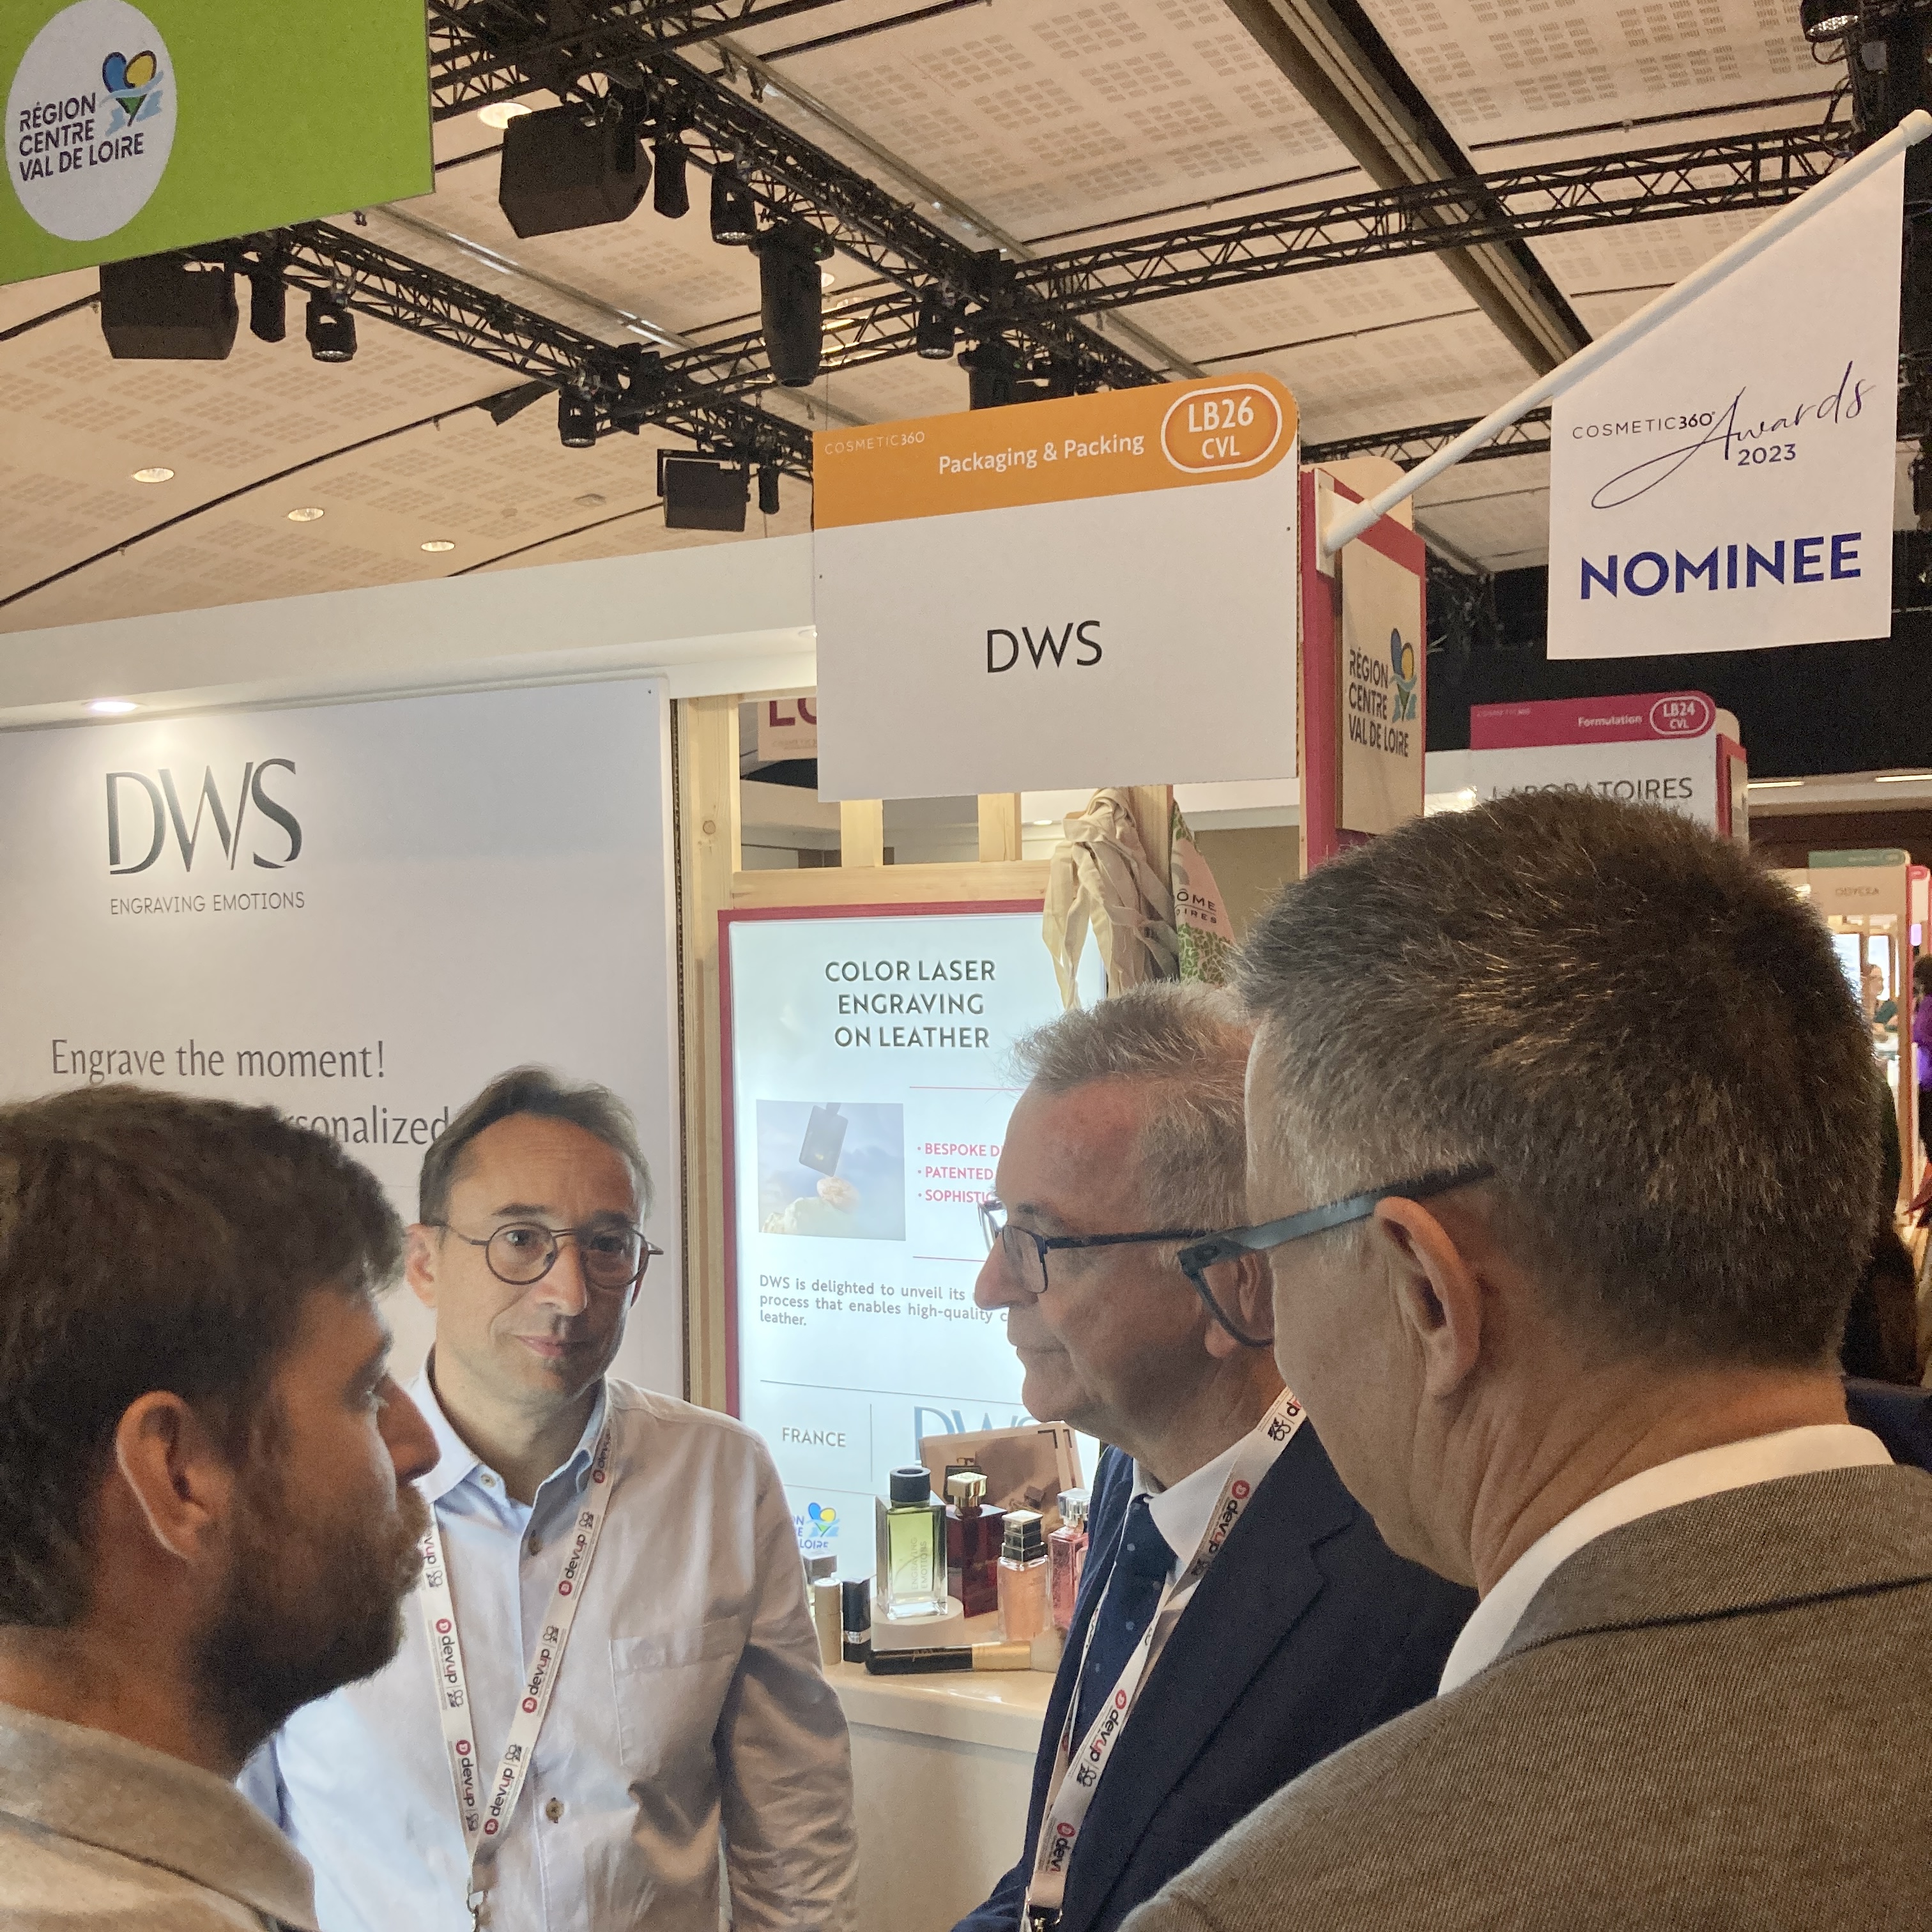 Stand DWS, lauréat aux Cosmetic 360 awards dans la catégorie "packaging and packing"